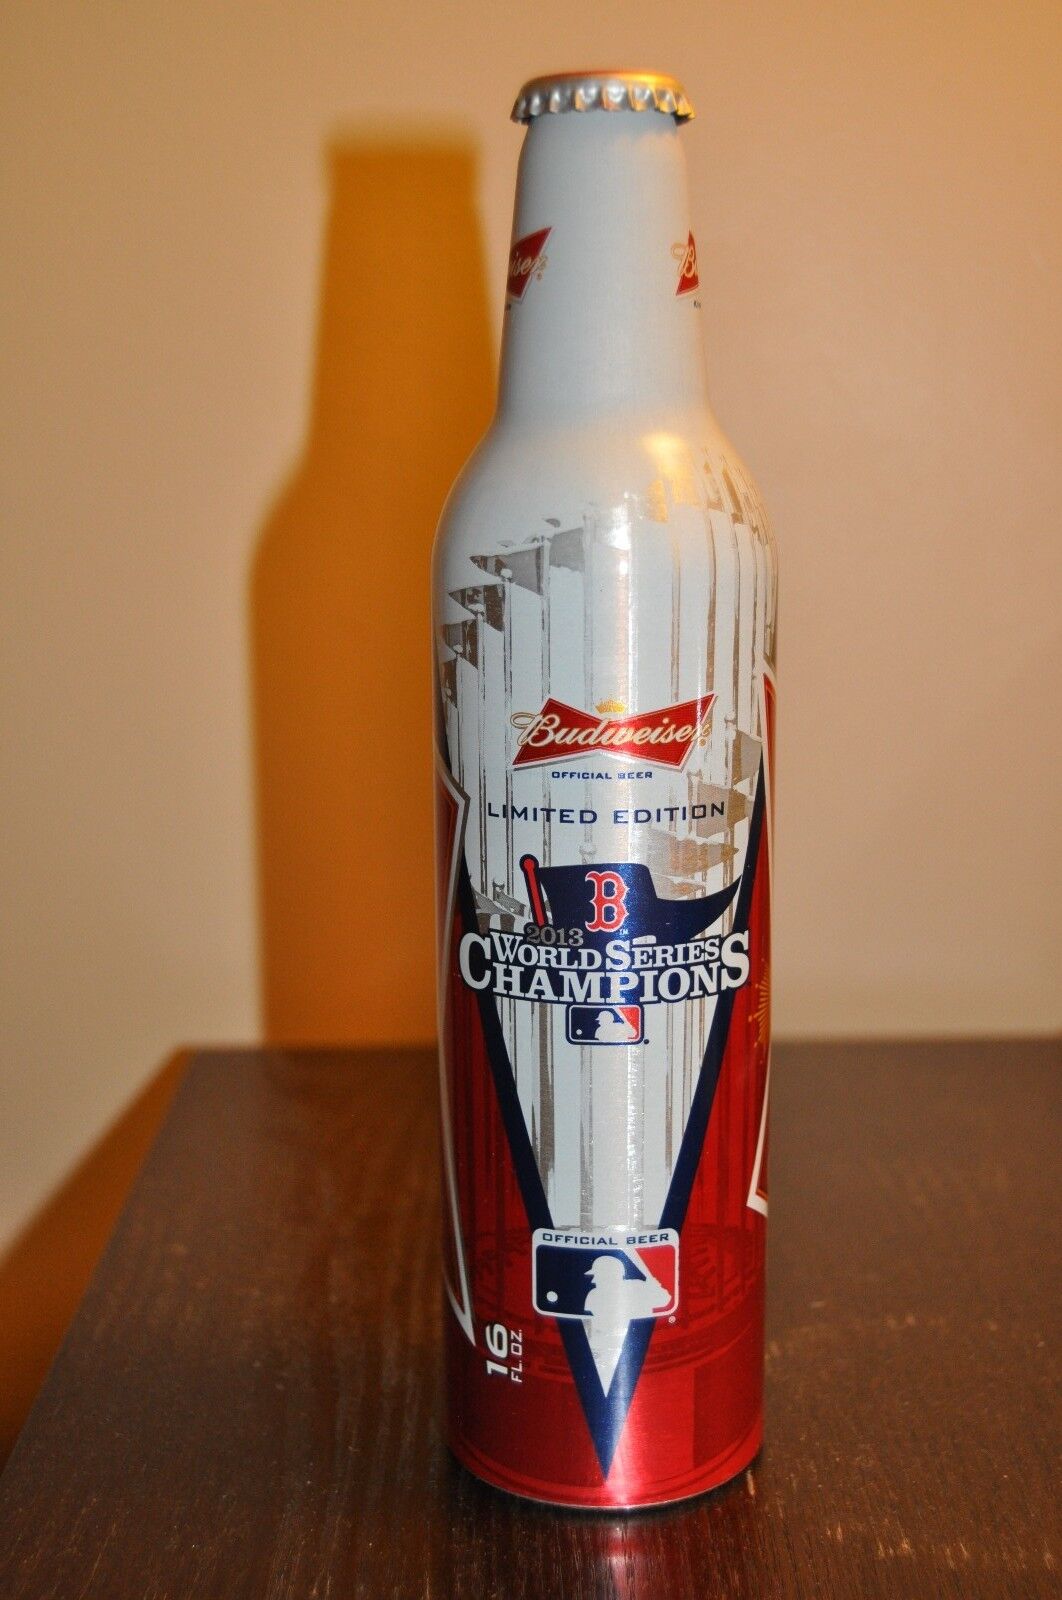 2013 BOSTON RED SOX WORLD SERIES CHAMPIONS LIMITED EDITION BUDWEISER BOTTLE